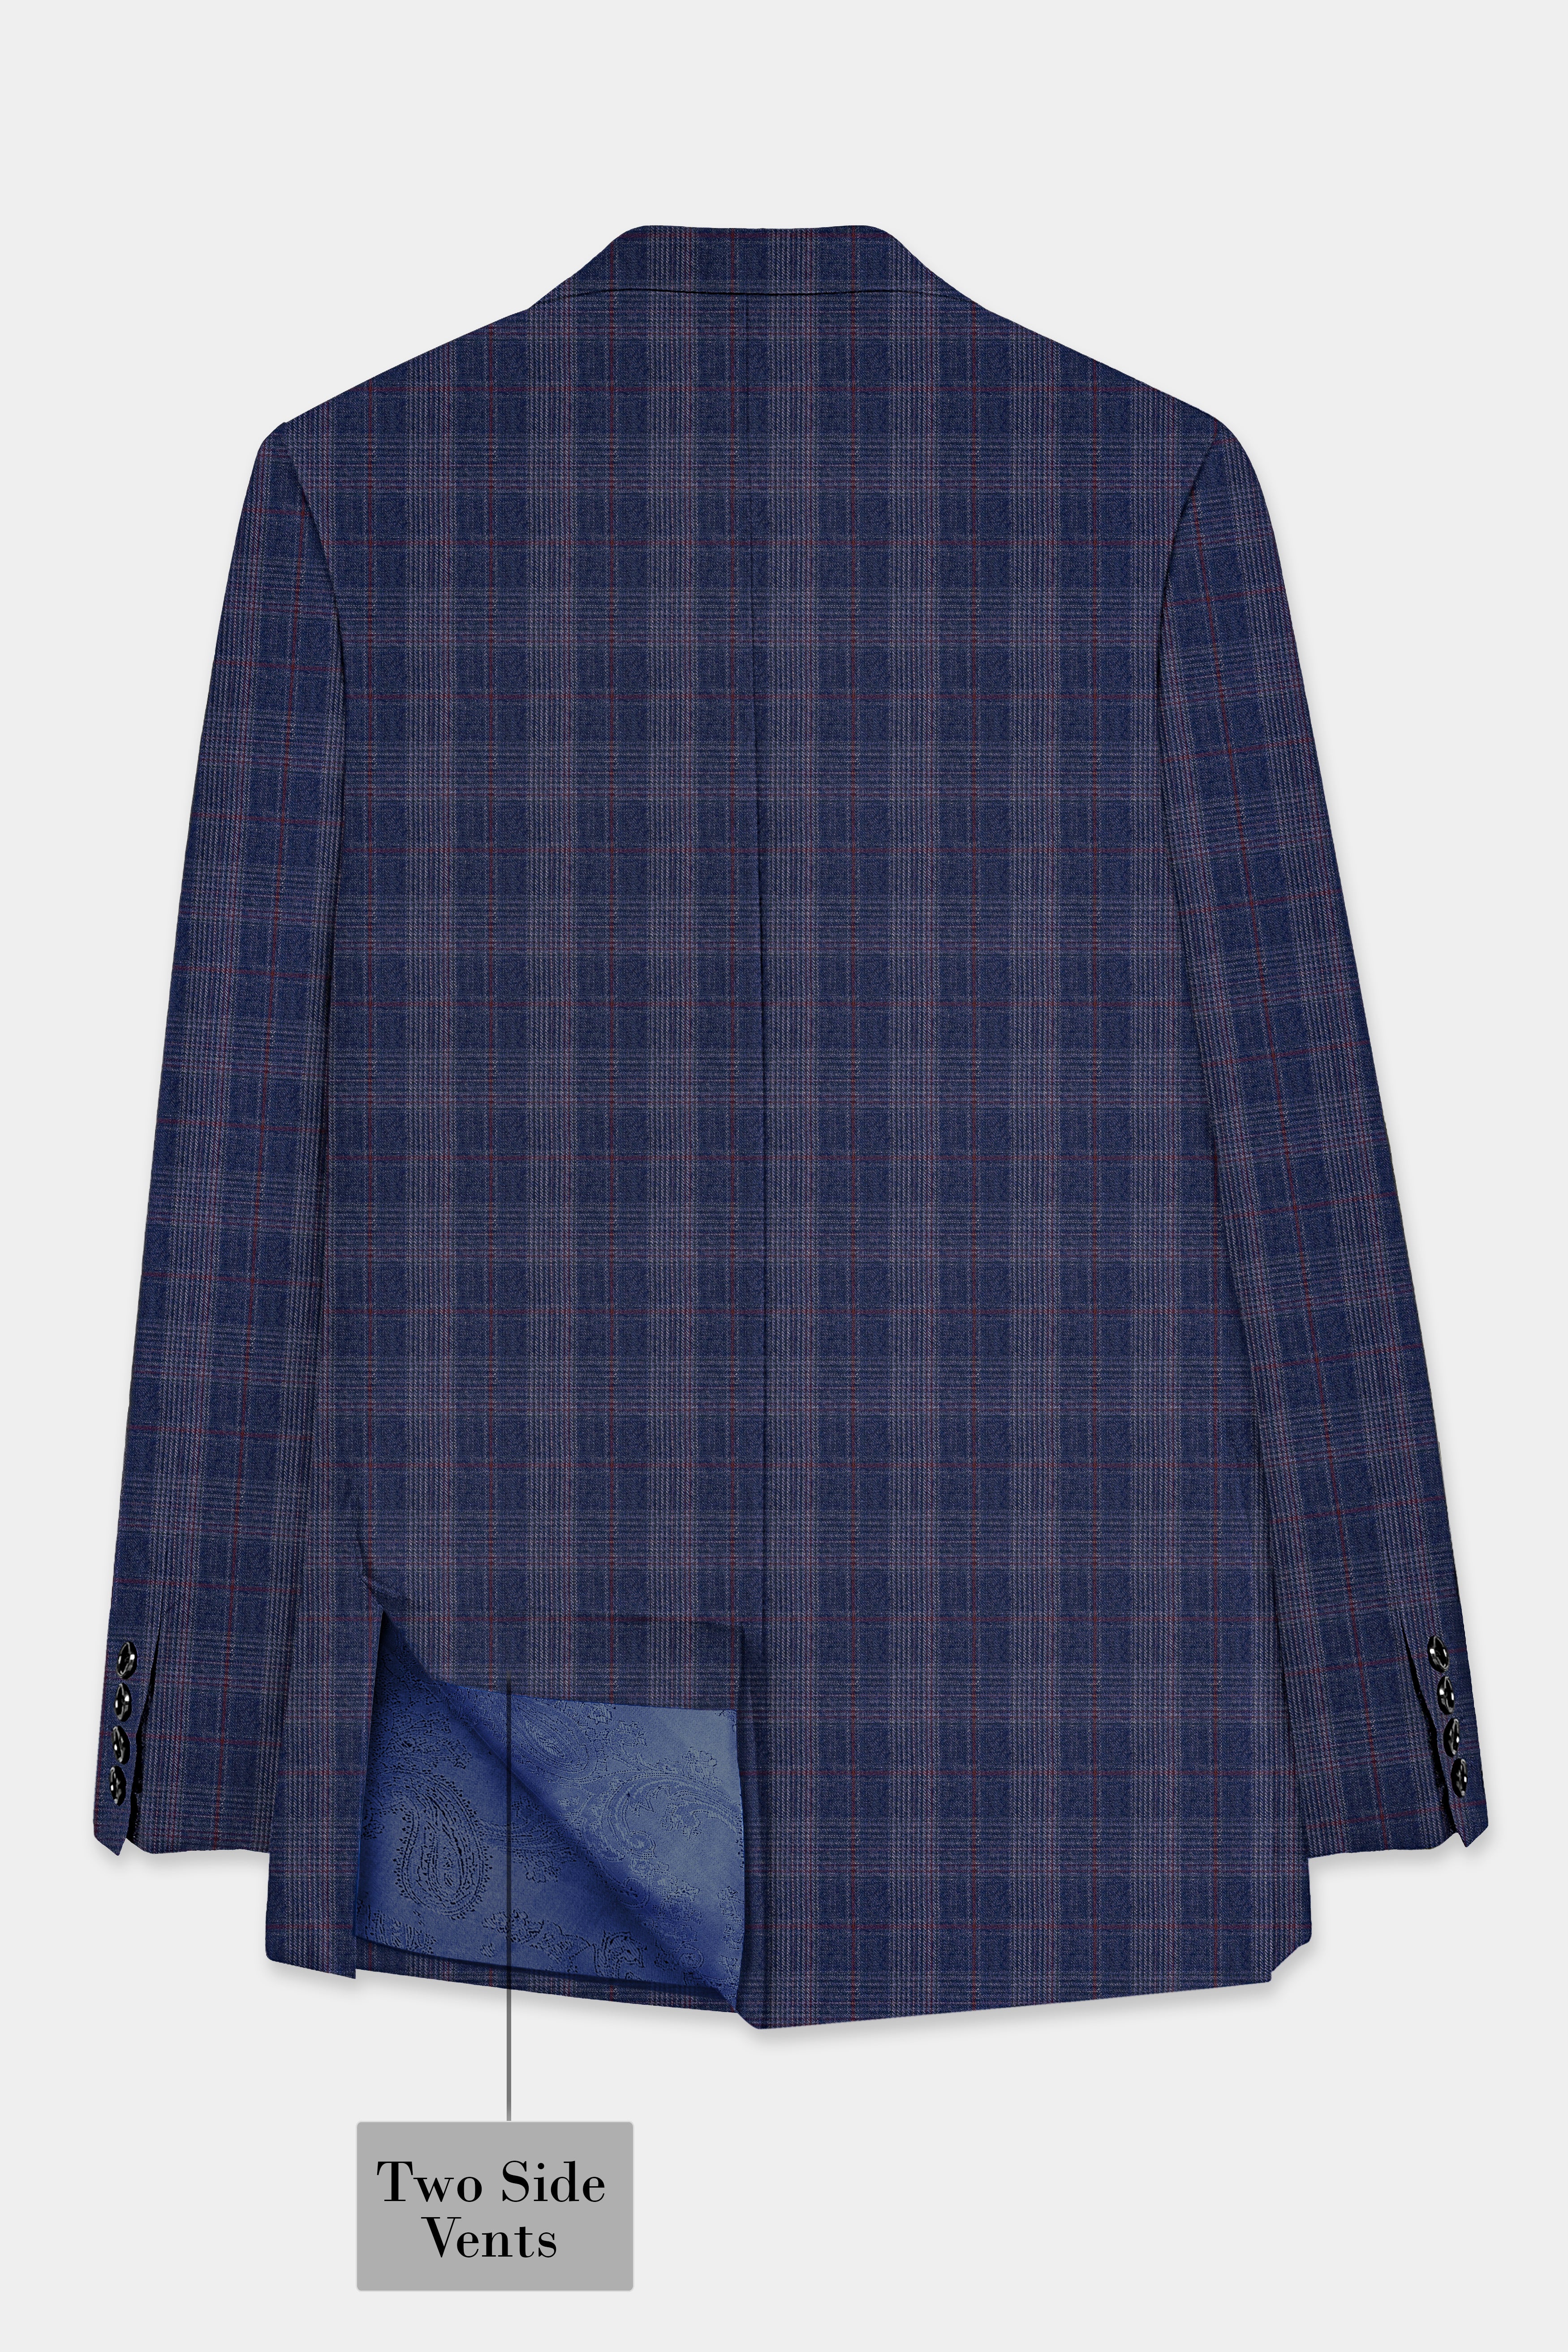 Tuna Blue Checkered Wool Blend Double Breasted Blazer